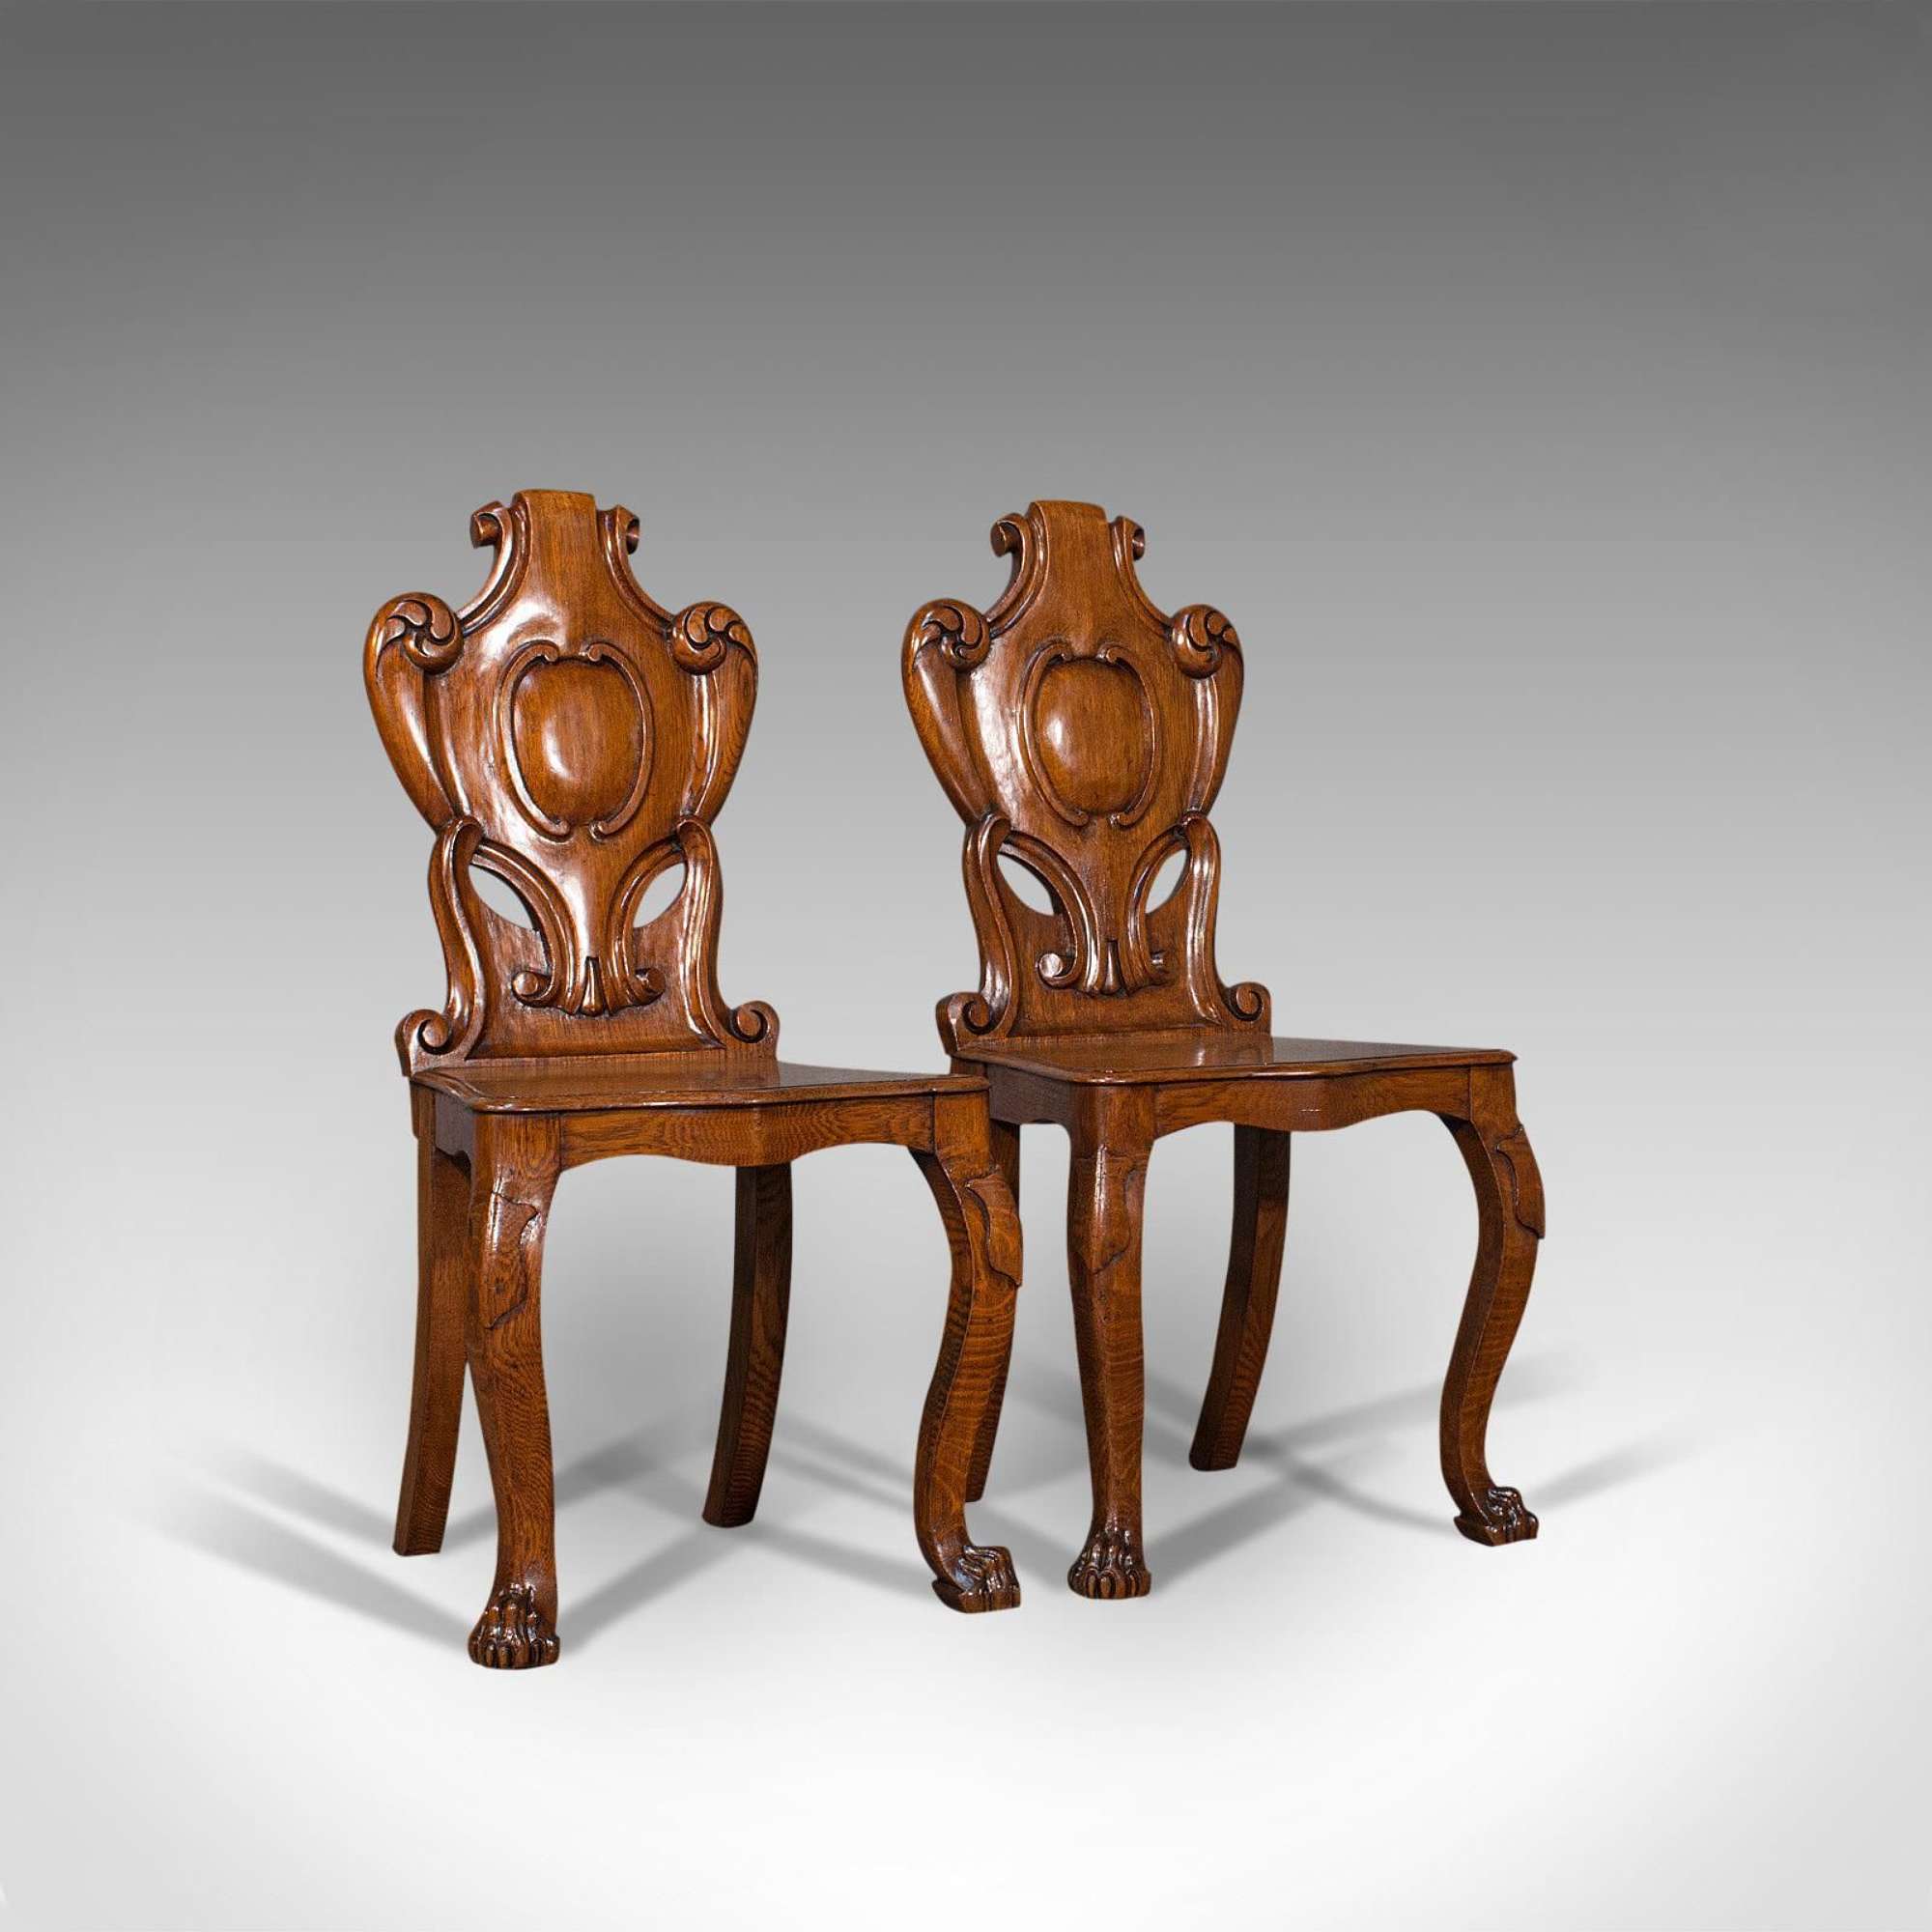 Pair Of Antique Shield Back Chairs, Scottish, Oak, Hall Seat, Victorian C.1880